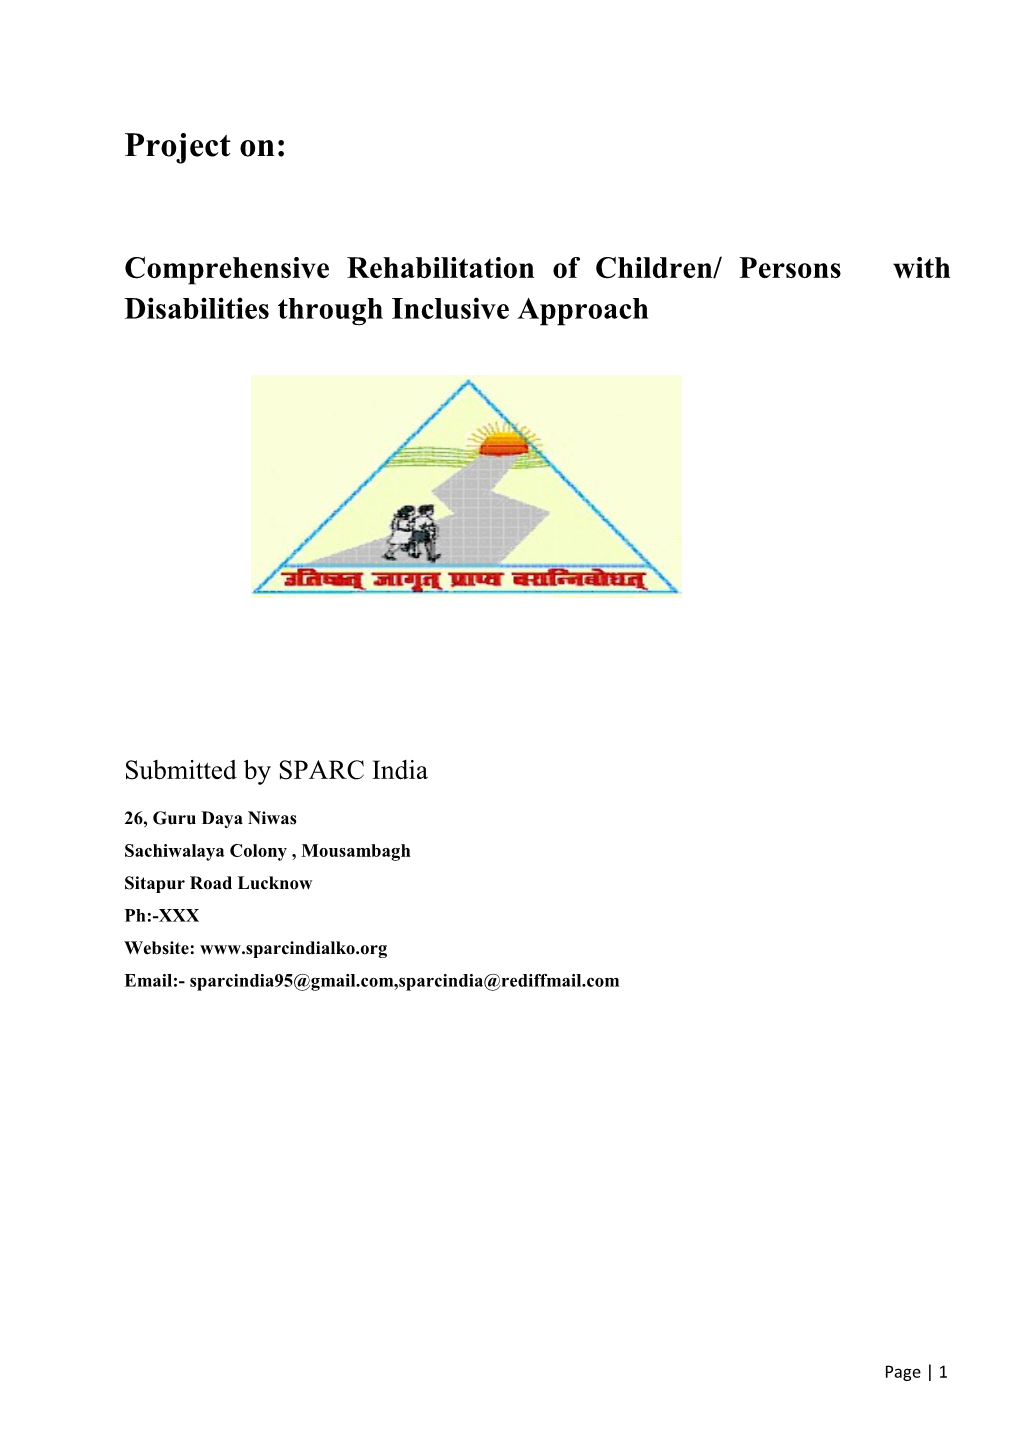 Comprehensive Rehabilitation of Children/ Persons with Disabilities Through Inclusive Approach